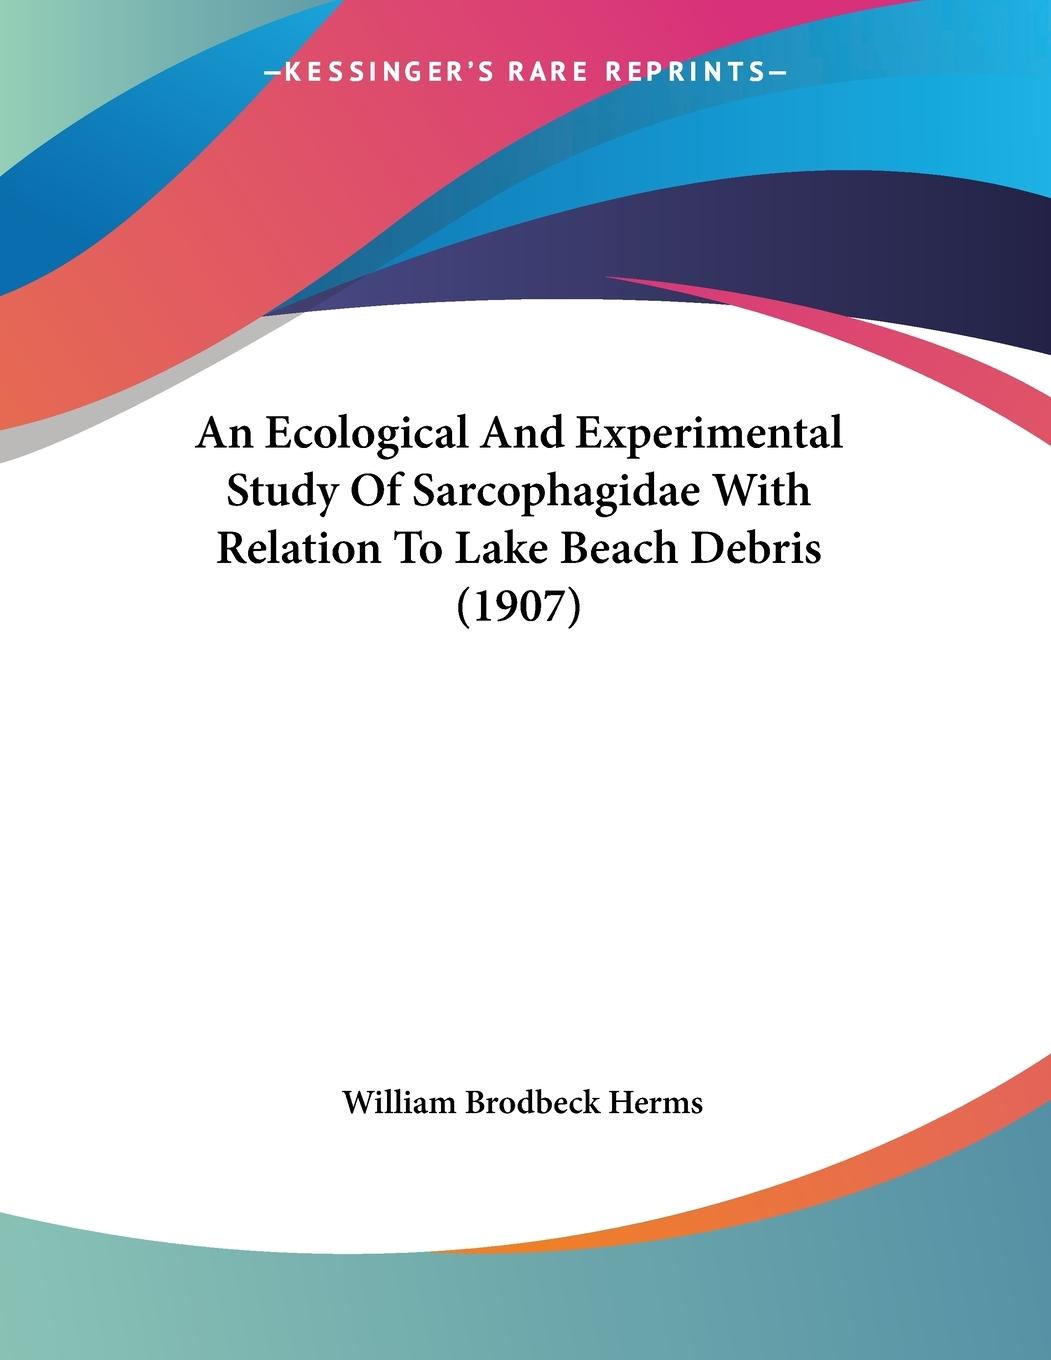 An Ecological And Experimental Study Of Sarcophagidae With Relation To Lake Beach Debris (1907) - Herms, William Brodbeck